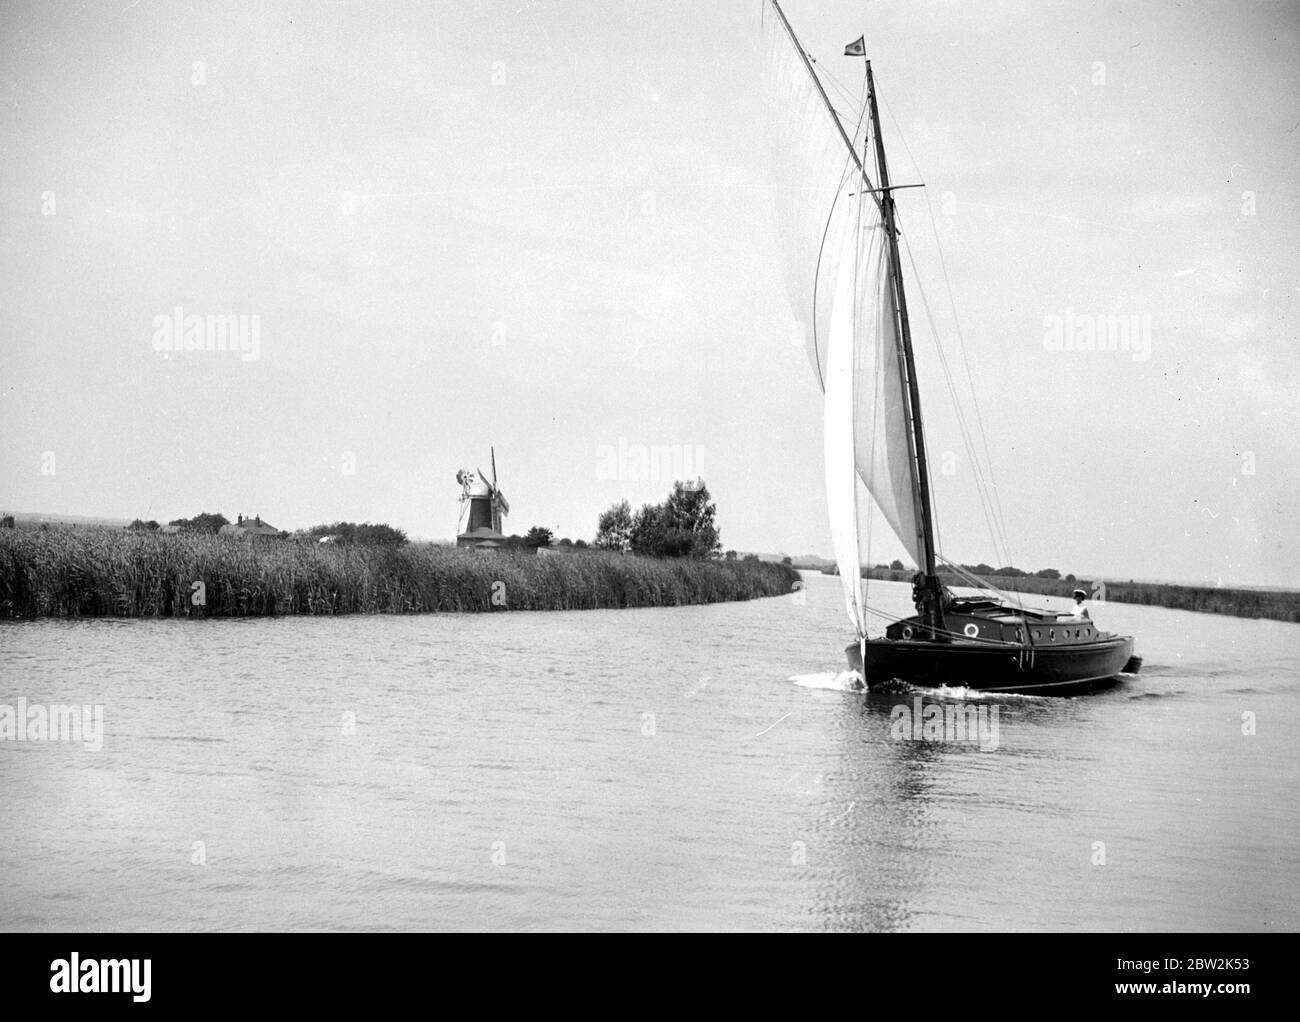 The Broads, Norfolk. Wherry sailing on a river / canal, a windmill in the background 1934 Stock Photo